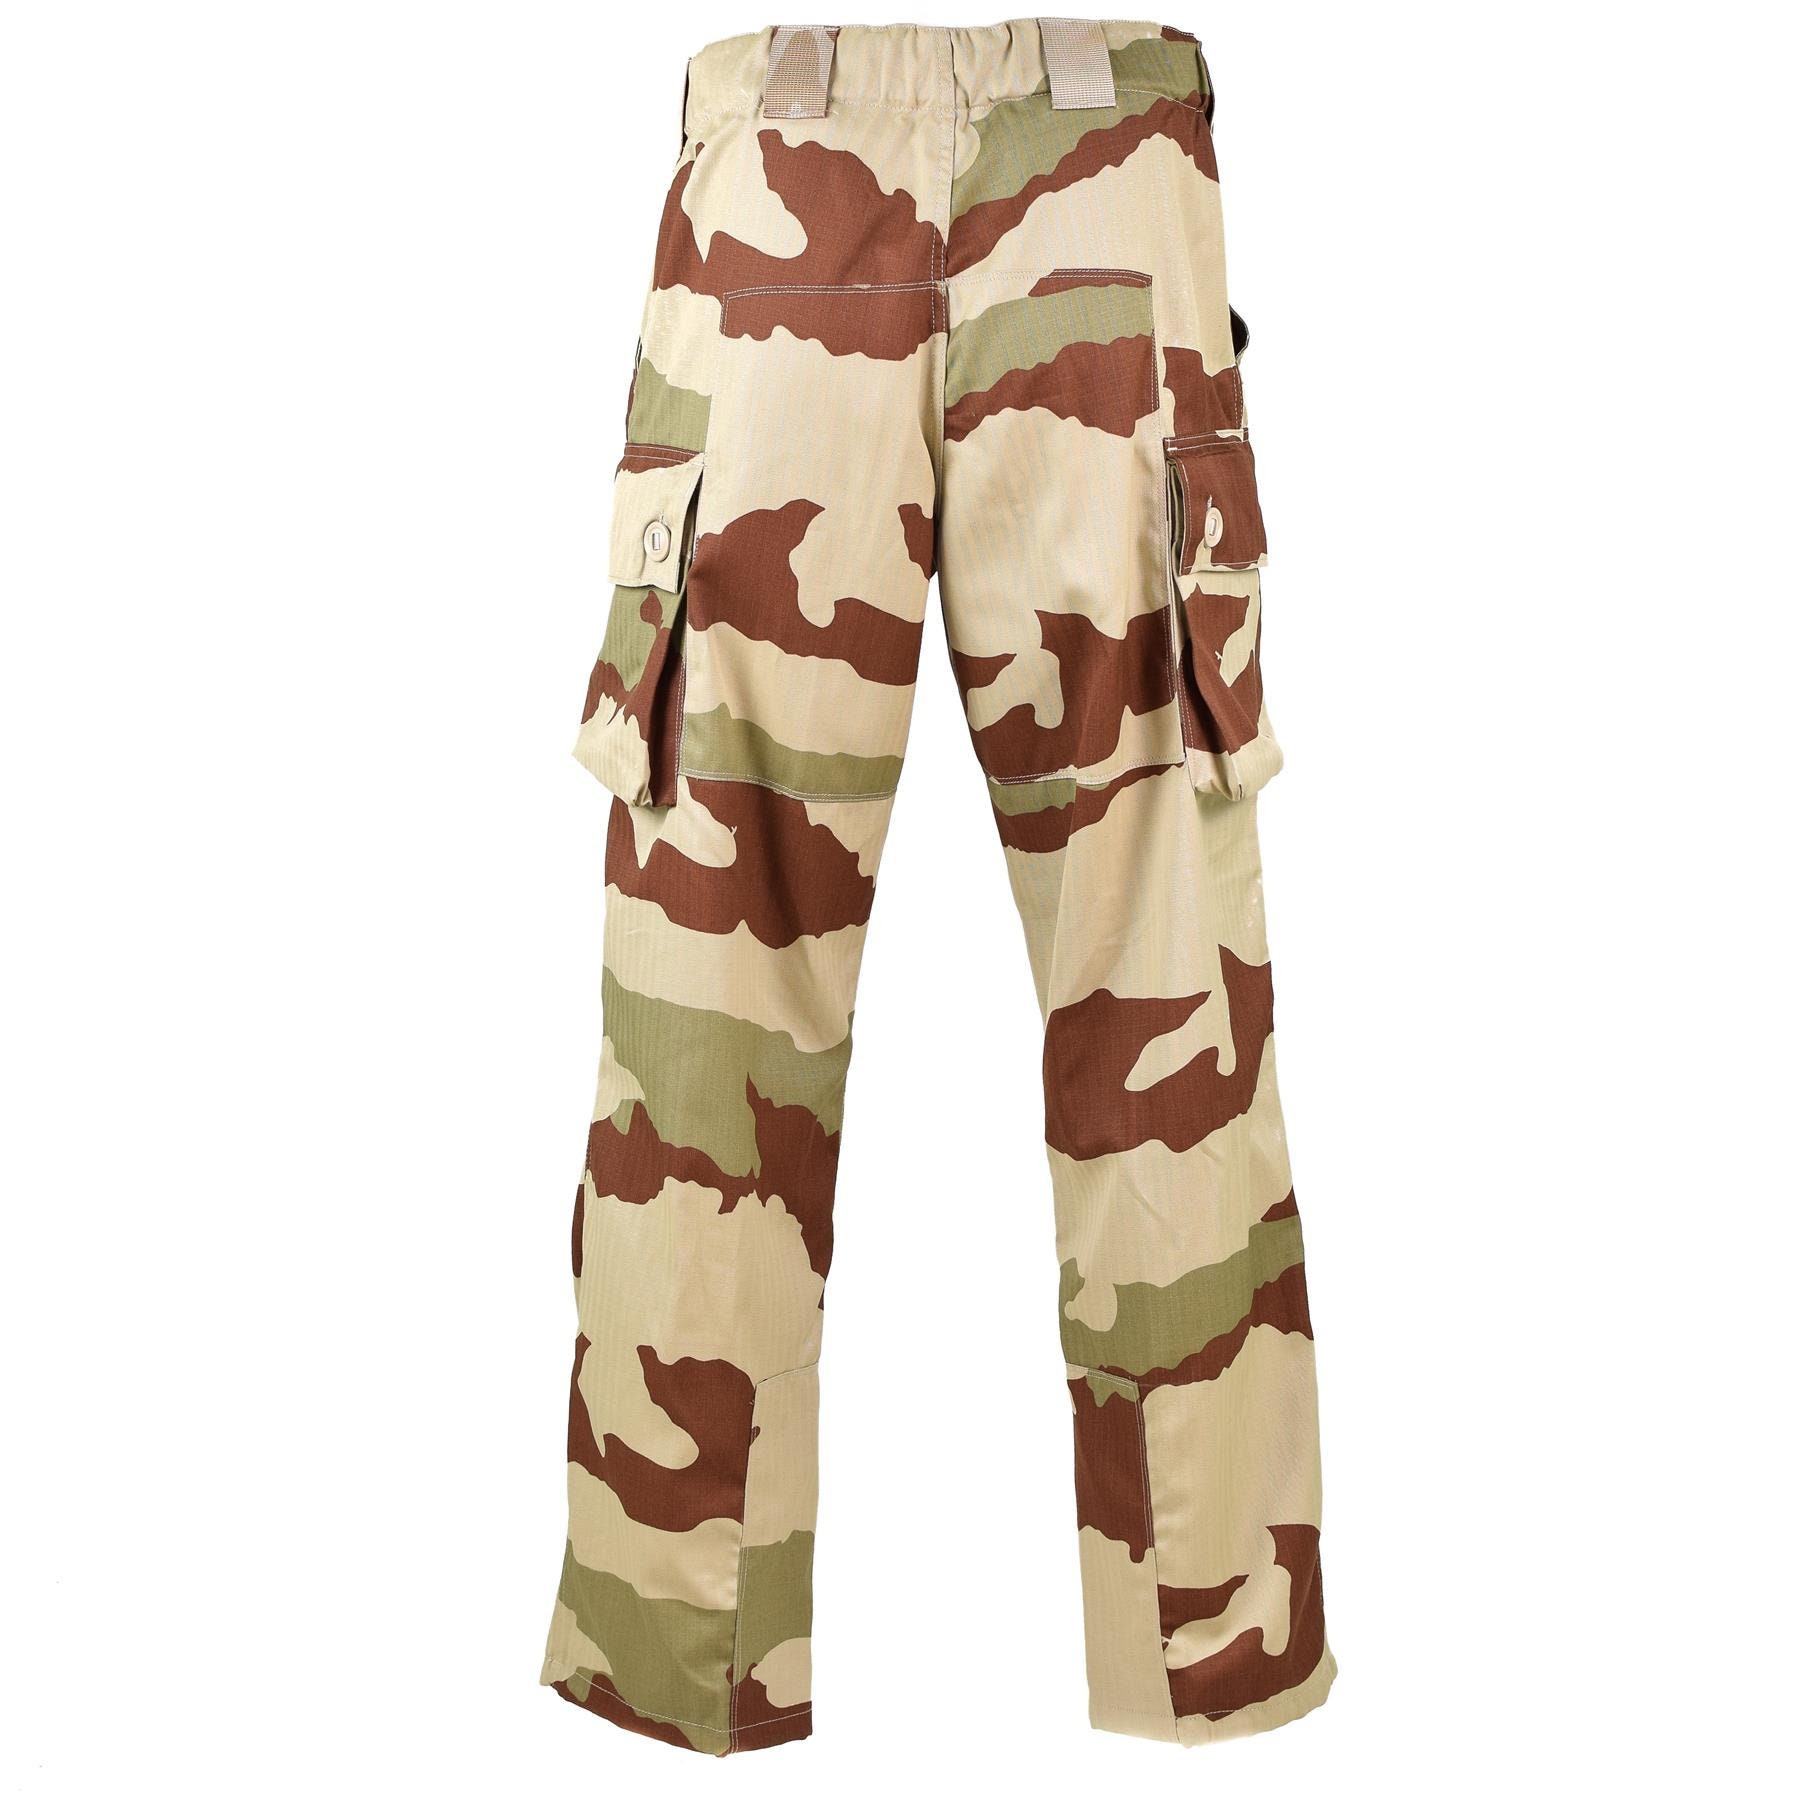 Genuine French Army combat pants military FELIN CCE camo T4 trousers Ripstop